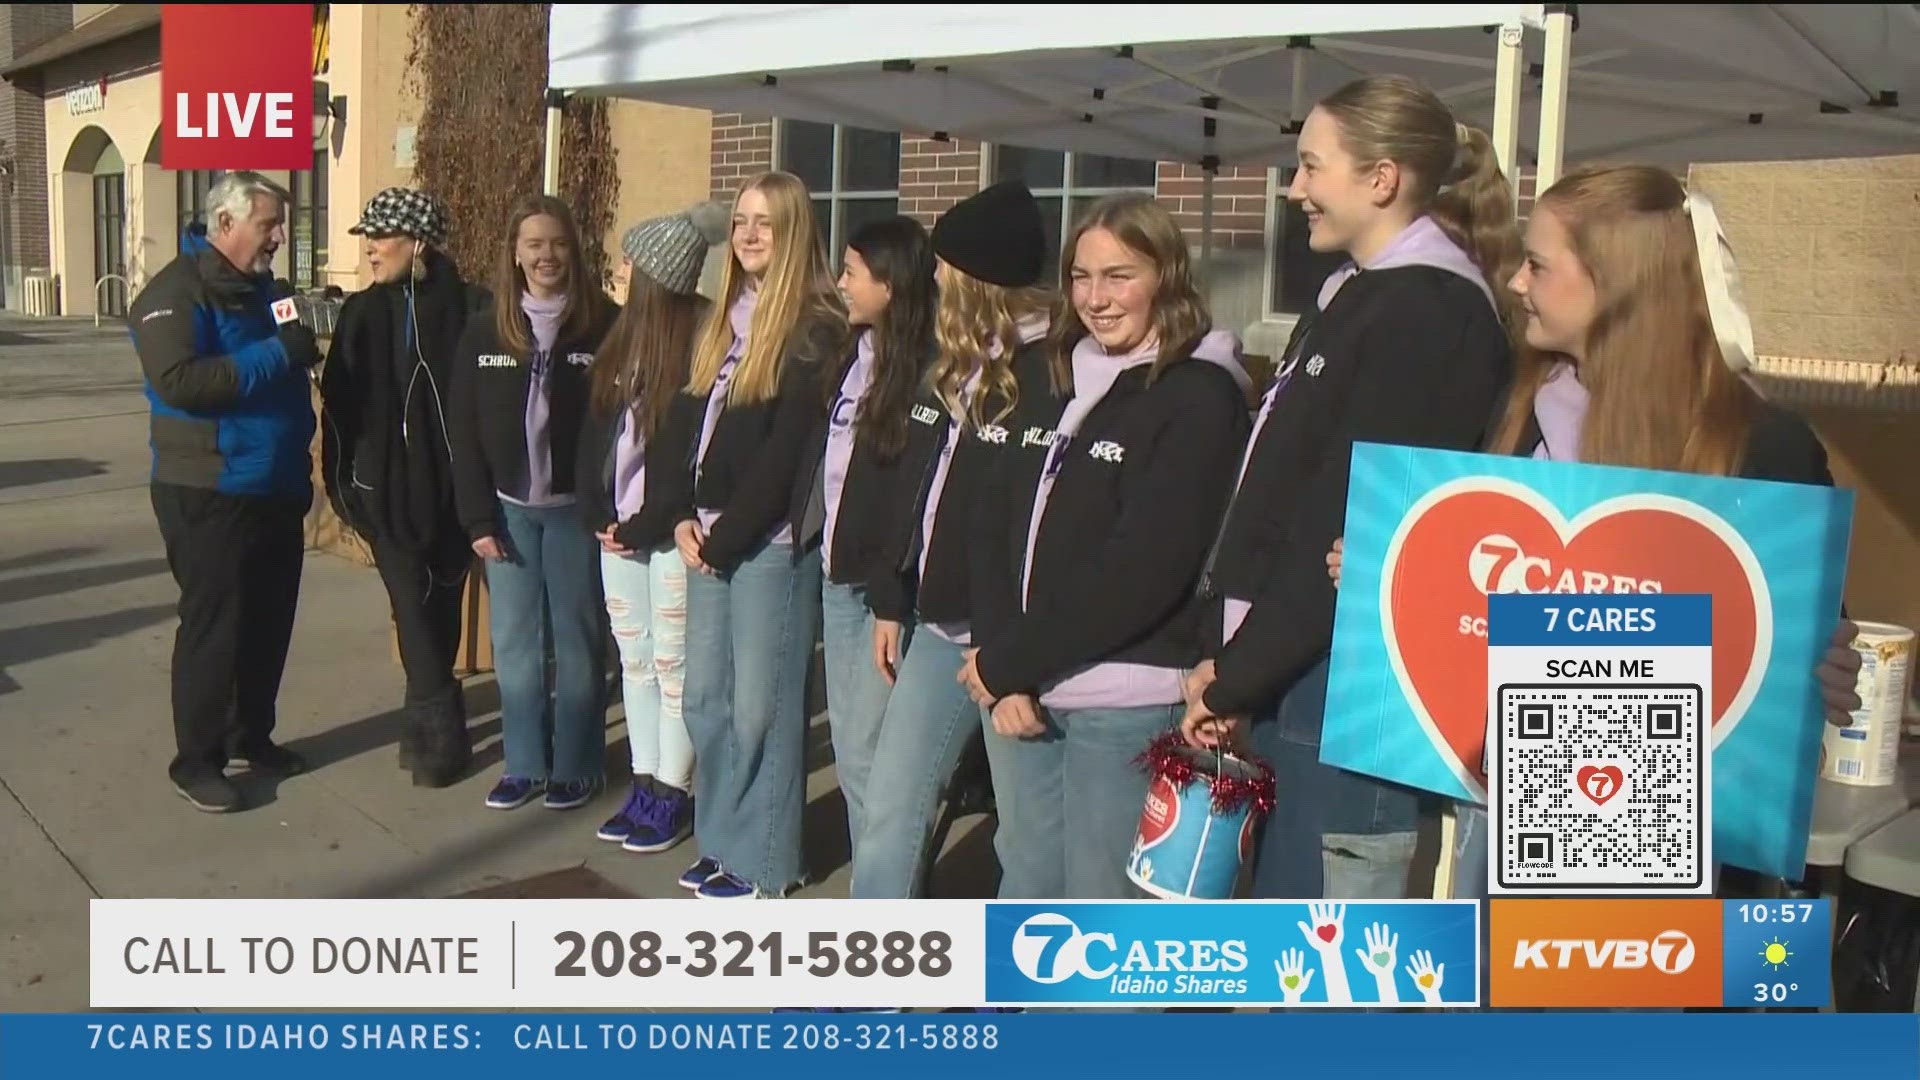 The Rocky Mountain High School dance team helped bring in donations for Idaho charities on Saturday at the Eagle Island Fred Meyer with Maggie O'Mara and Jim Duthie.